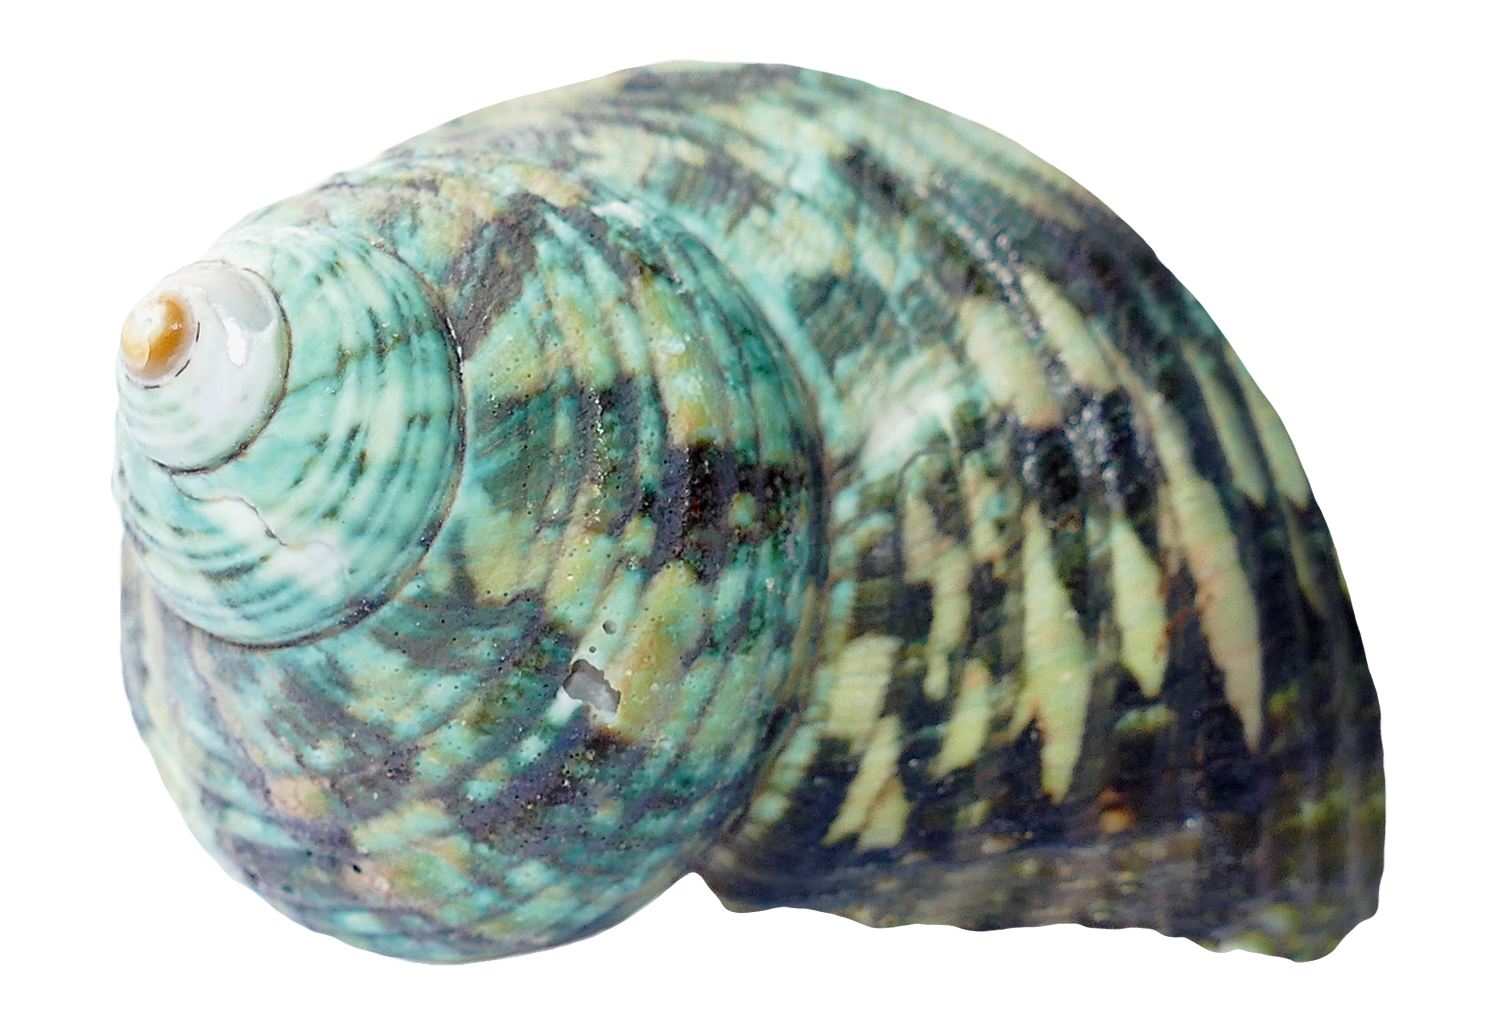 Turquoise Patterned Seashell PNG